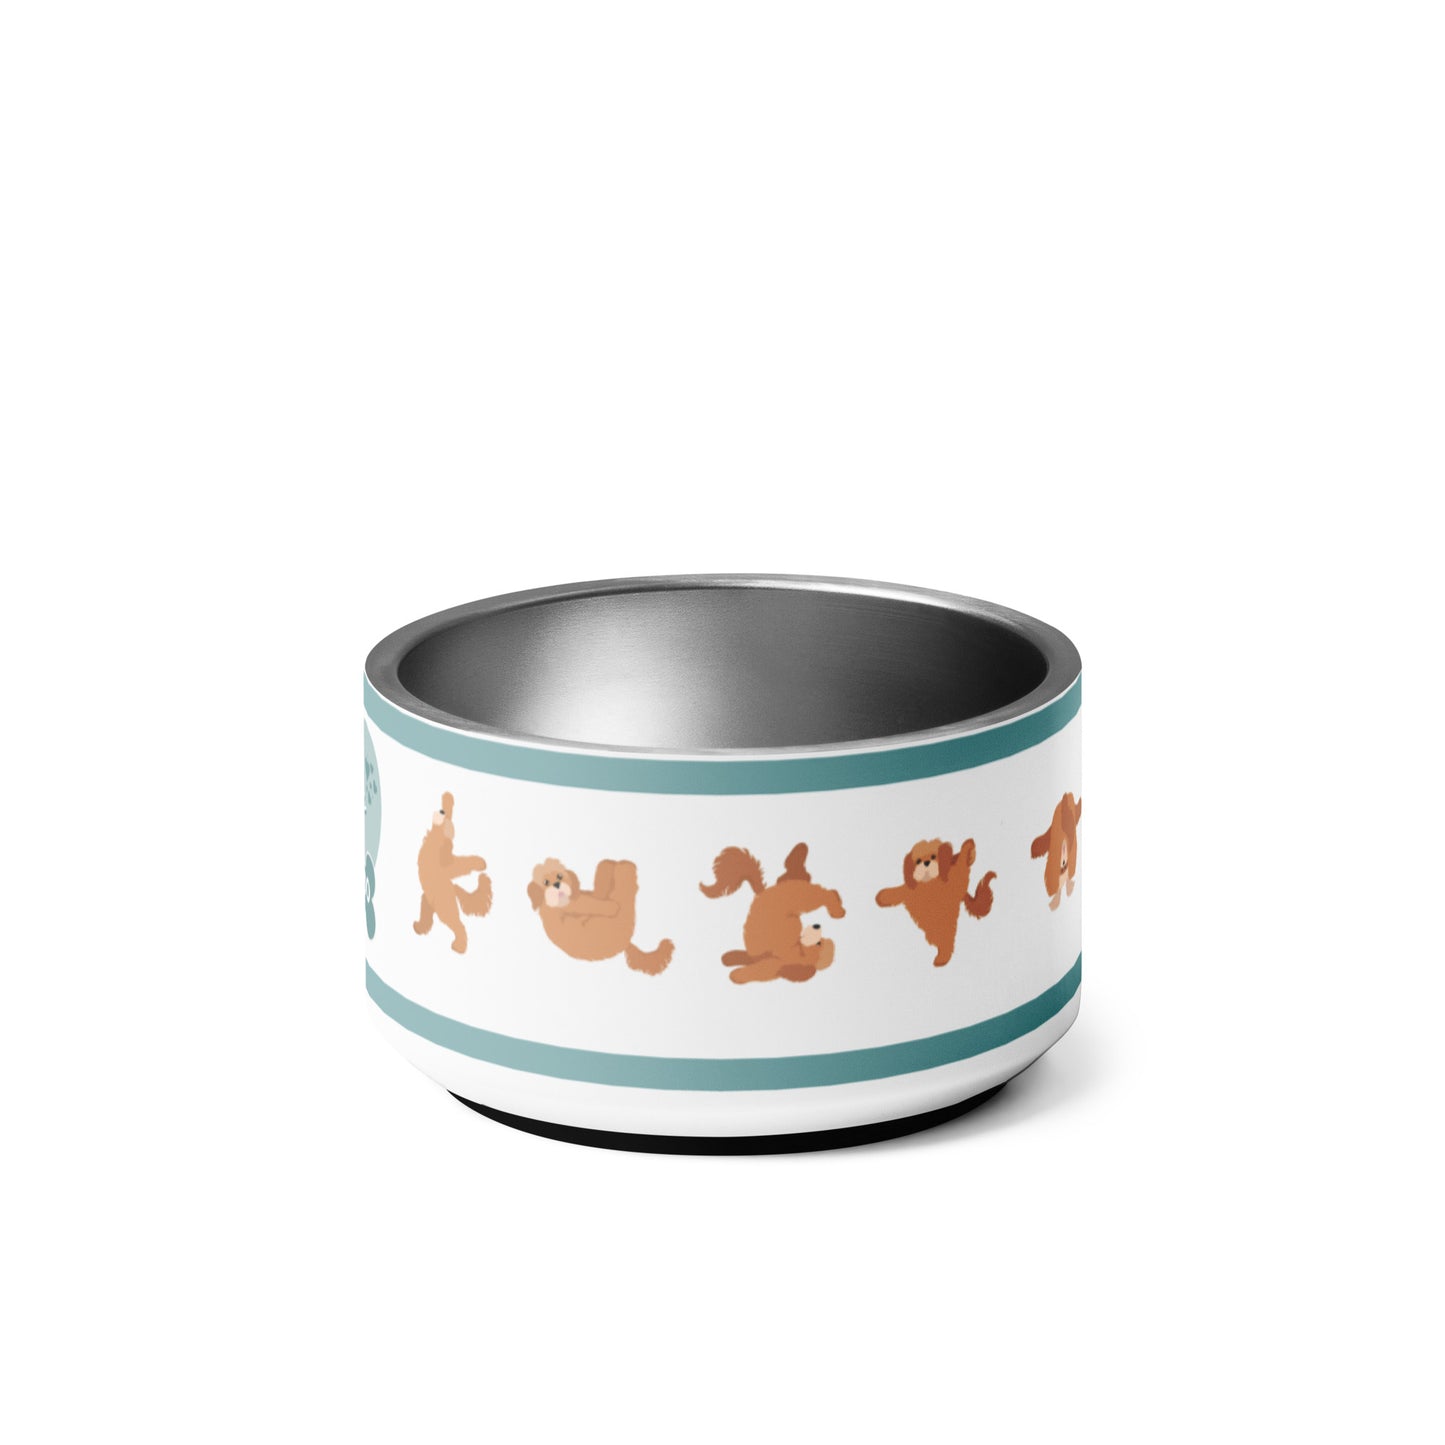 "The Best Cockapoo" small pet bowl